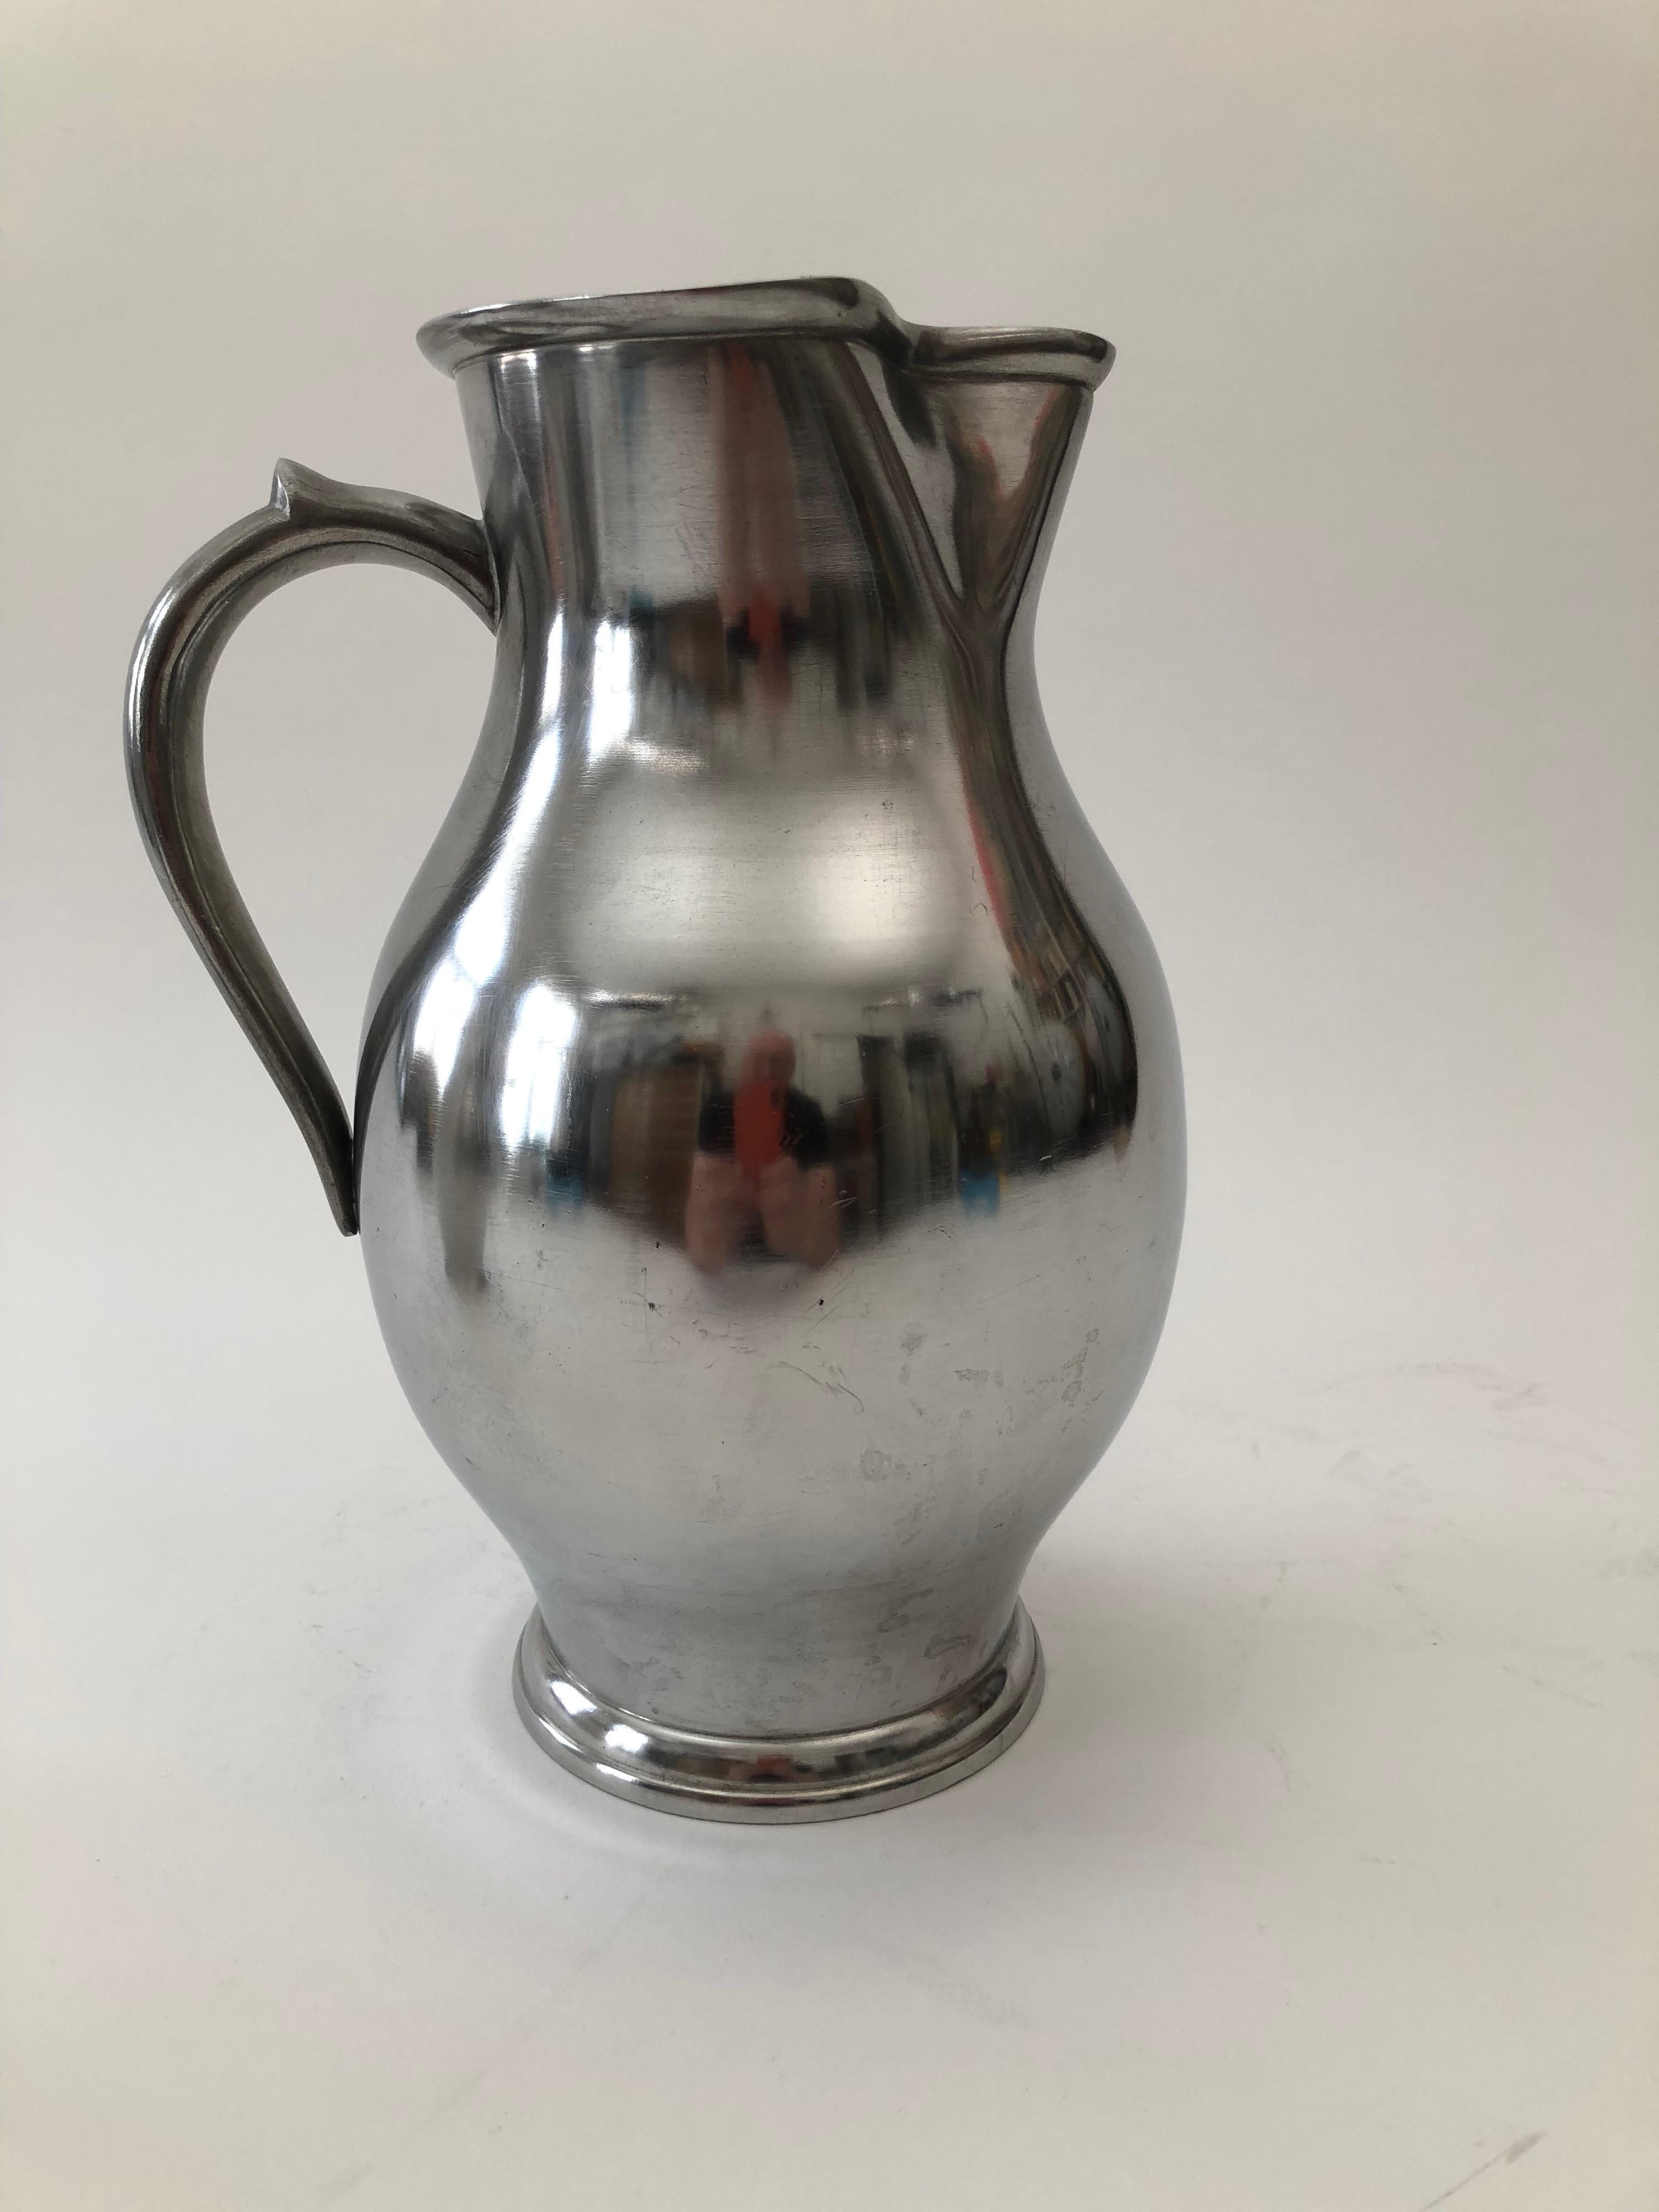 Cast Two Pewter Wine Jugs from the Wiener Zin Manufacture Dated 1837 For Sale